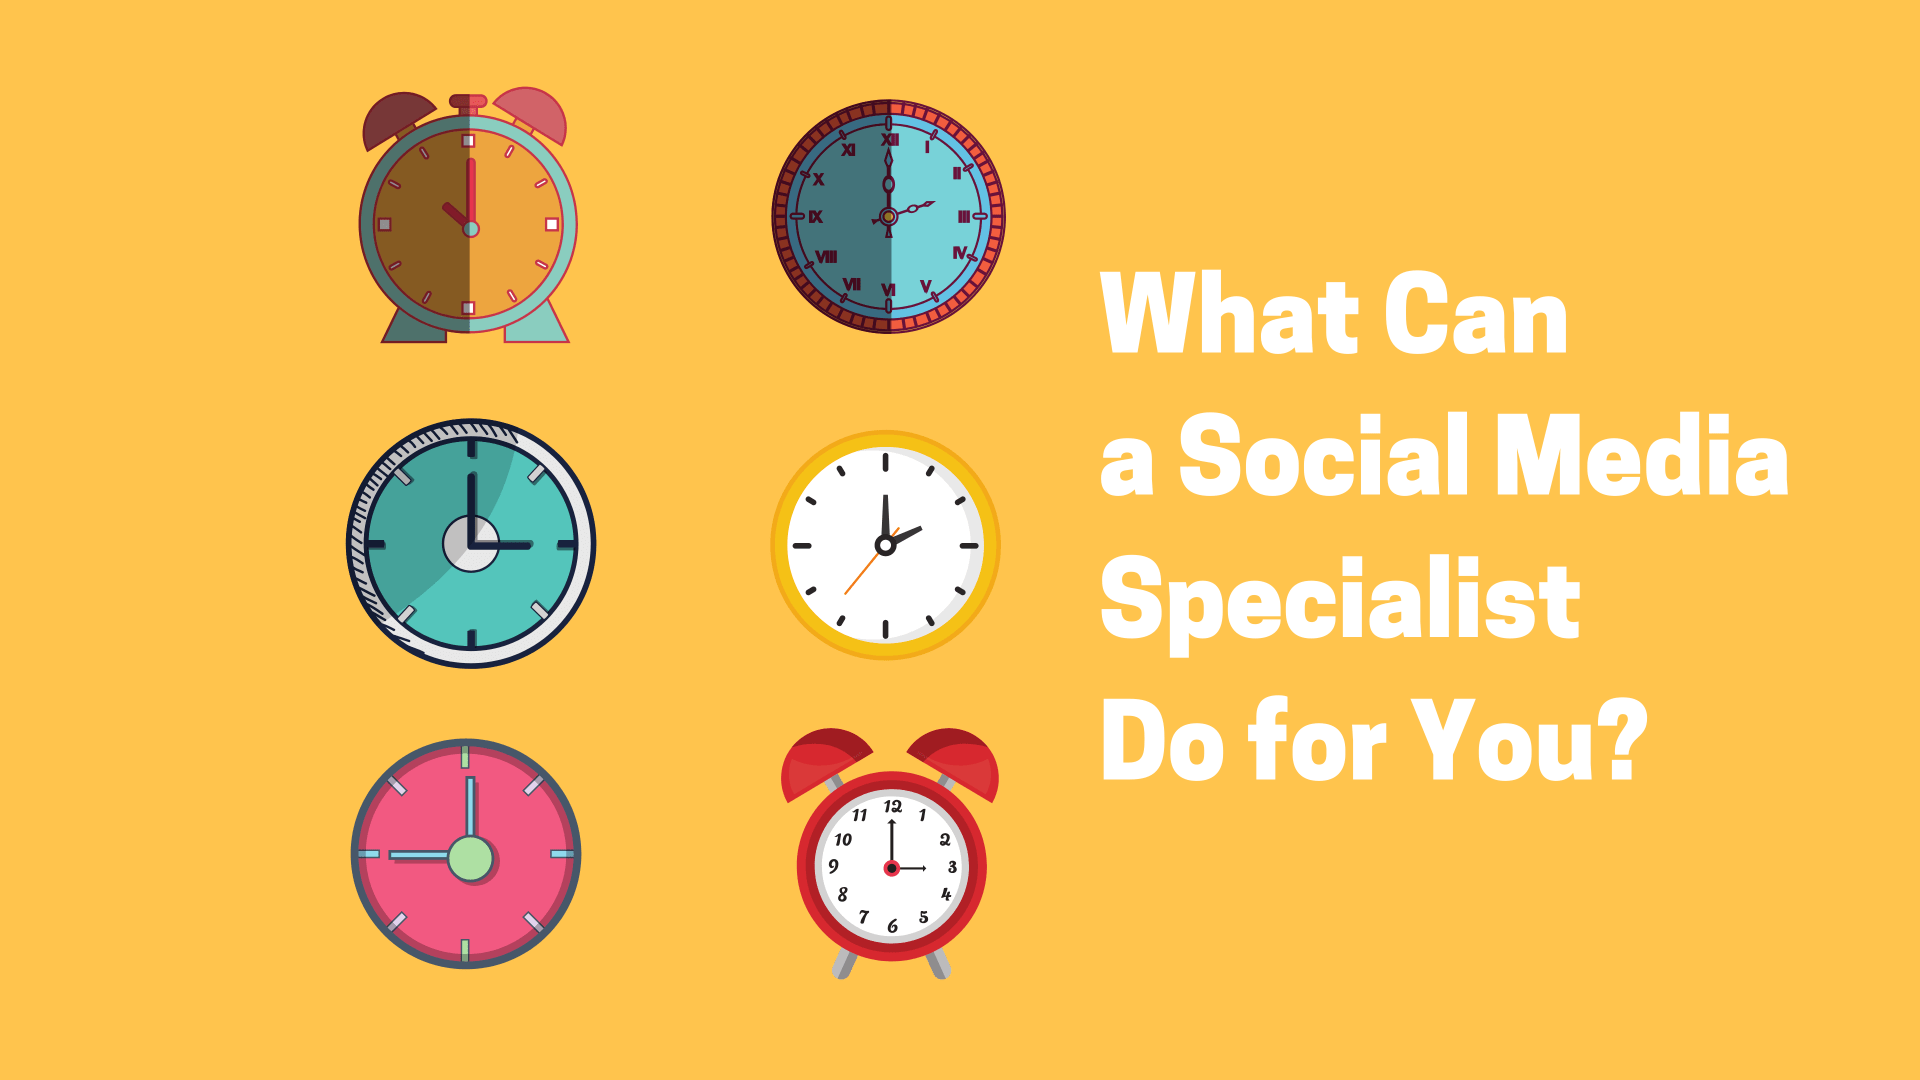 What can a Social Media Specialist do for you?